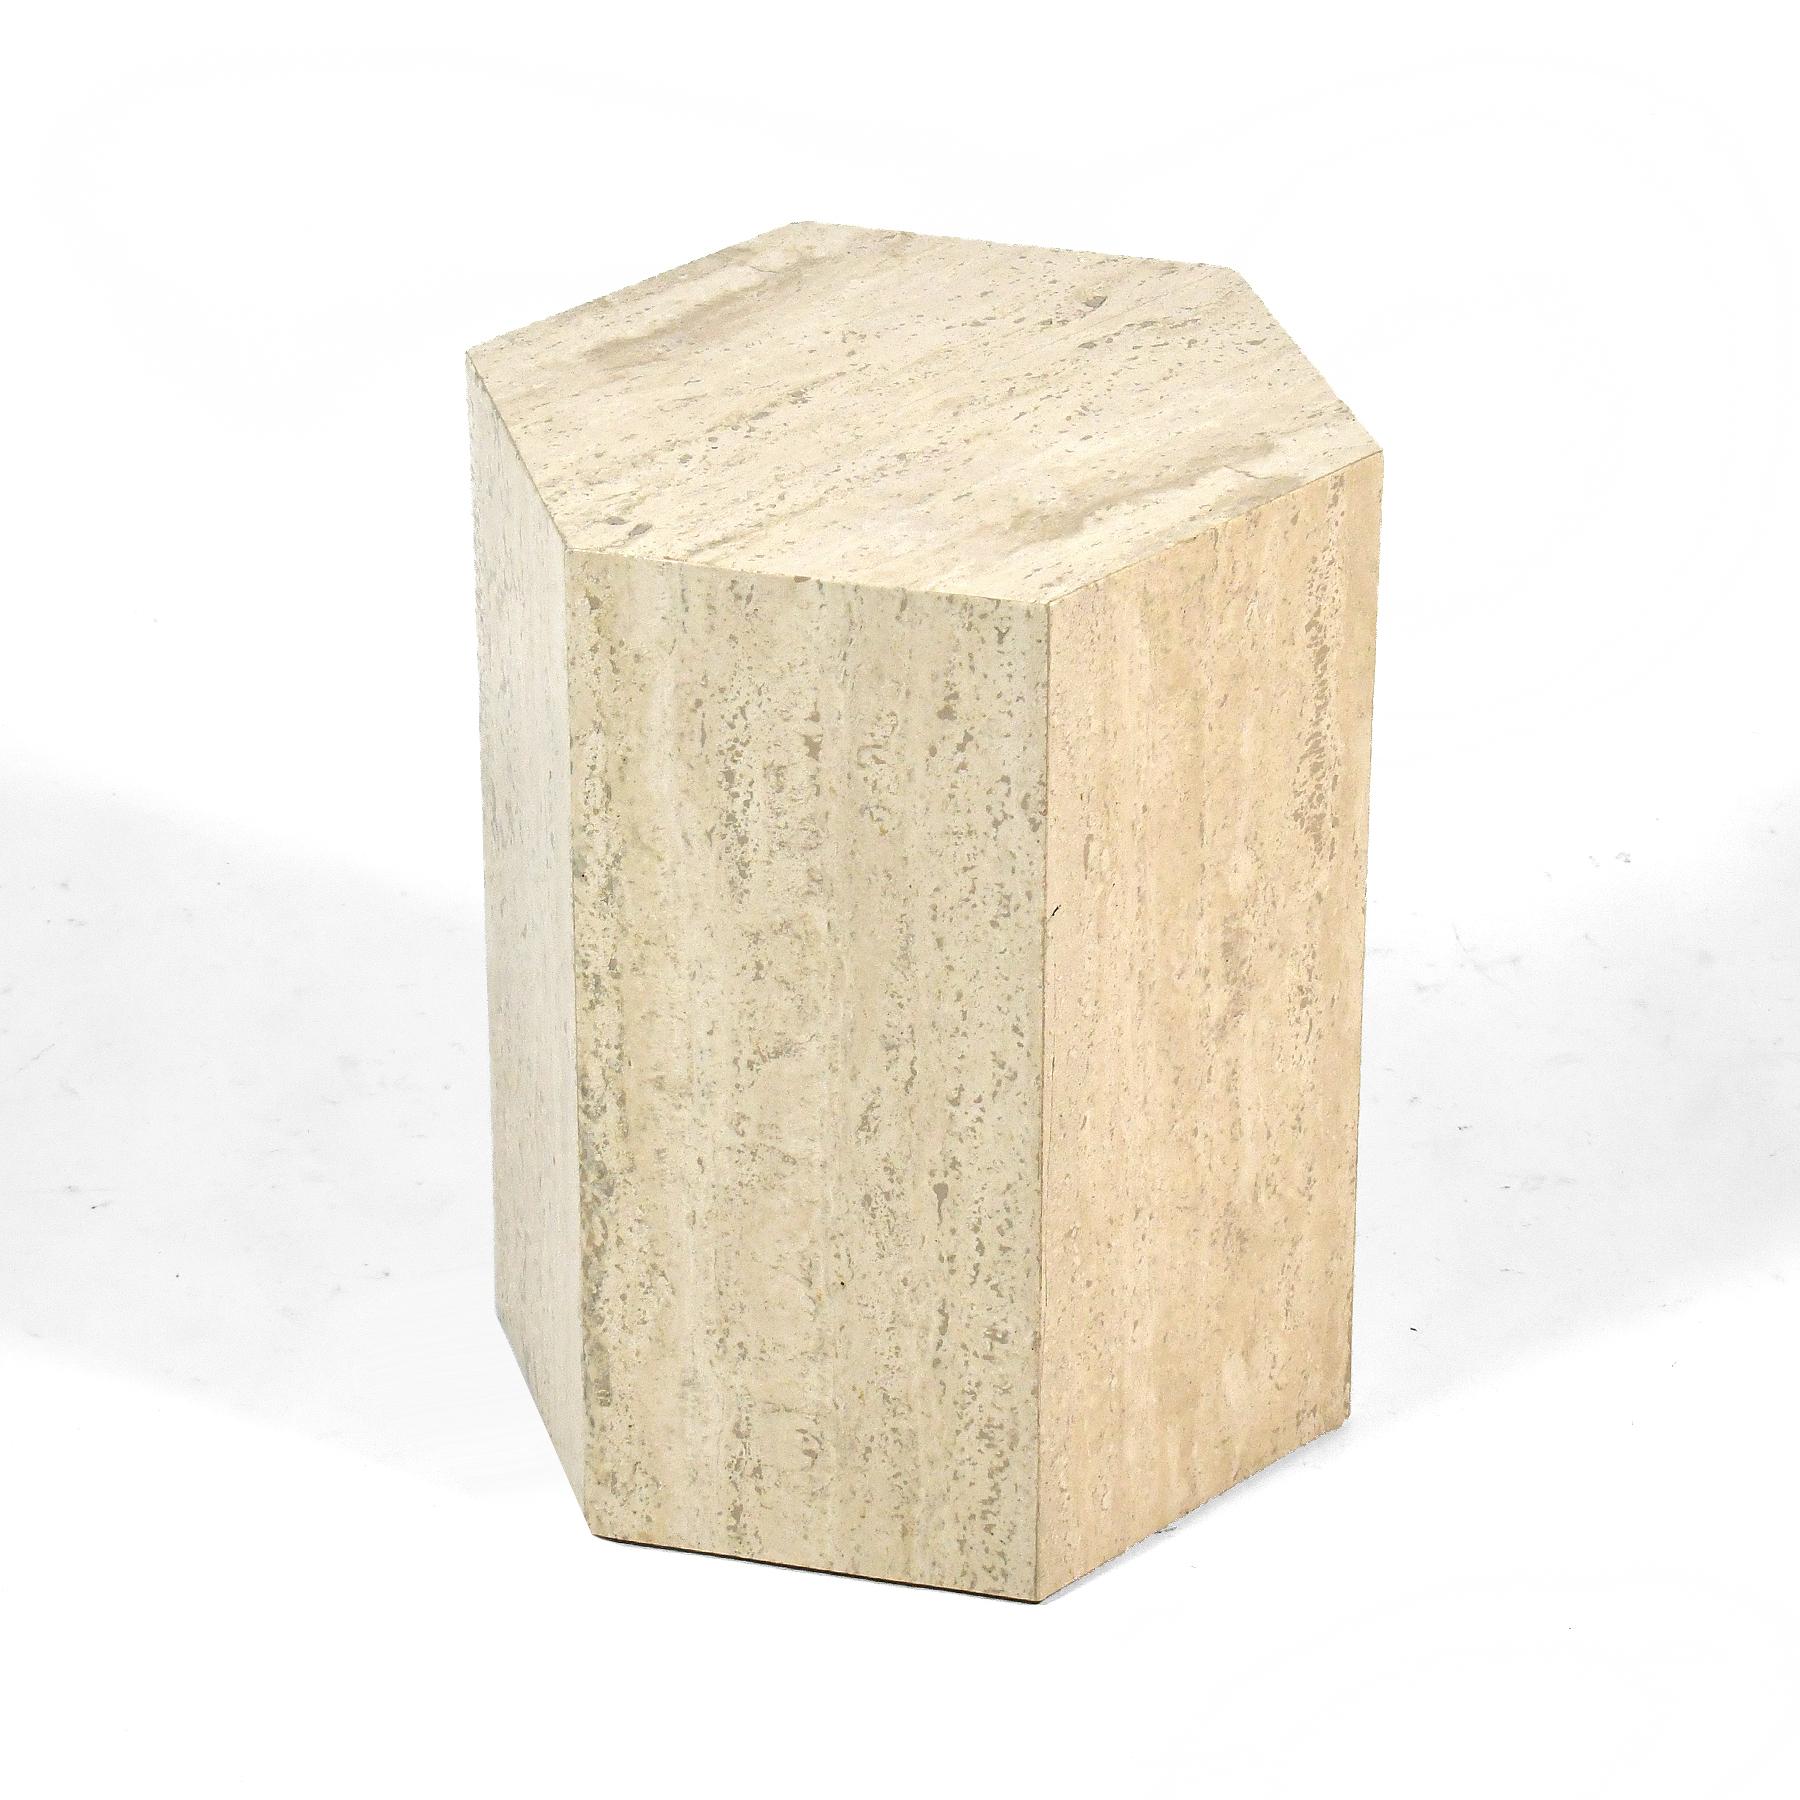 A tasteful little piece that can serve equally well as a side table, a nightstand, or a pedestal, the hexagonal form is fabricated of travertine marble.

18 1/8